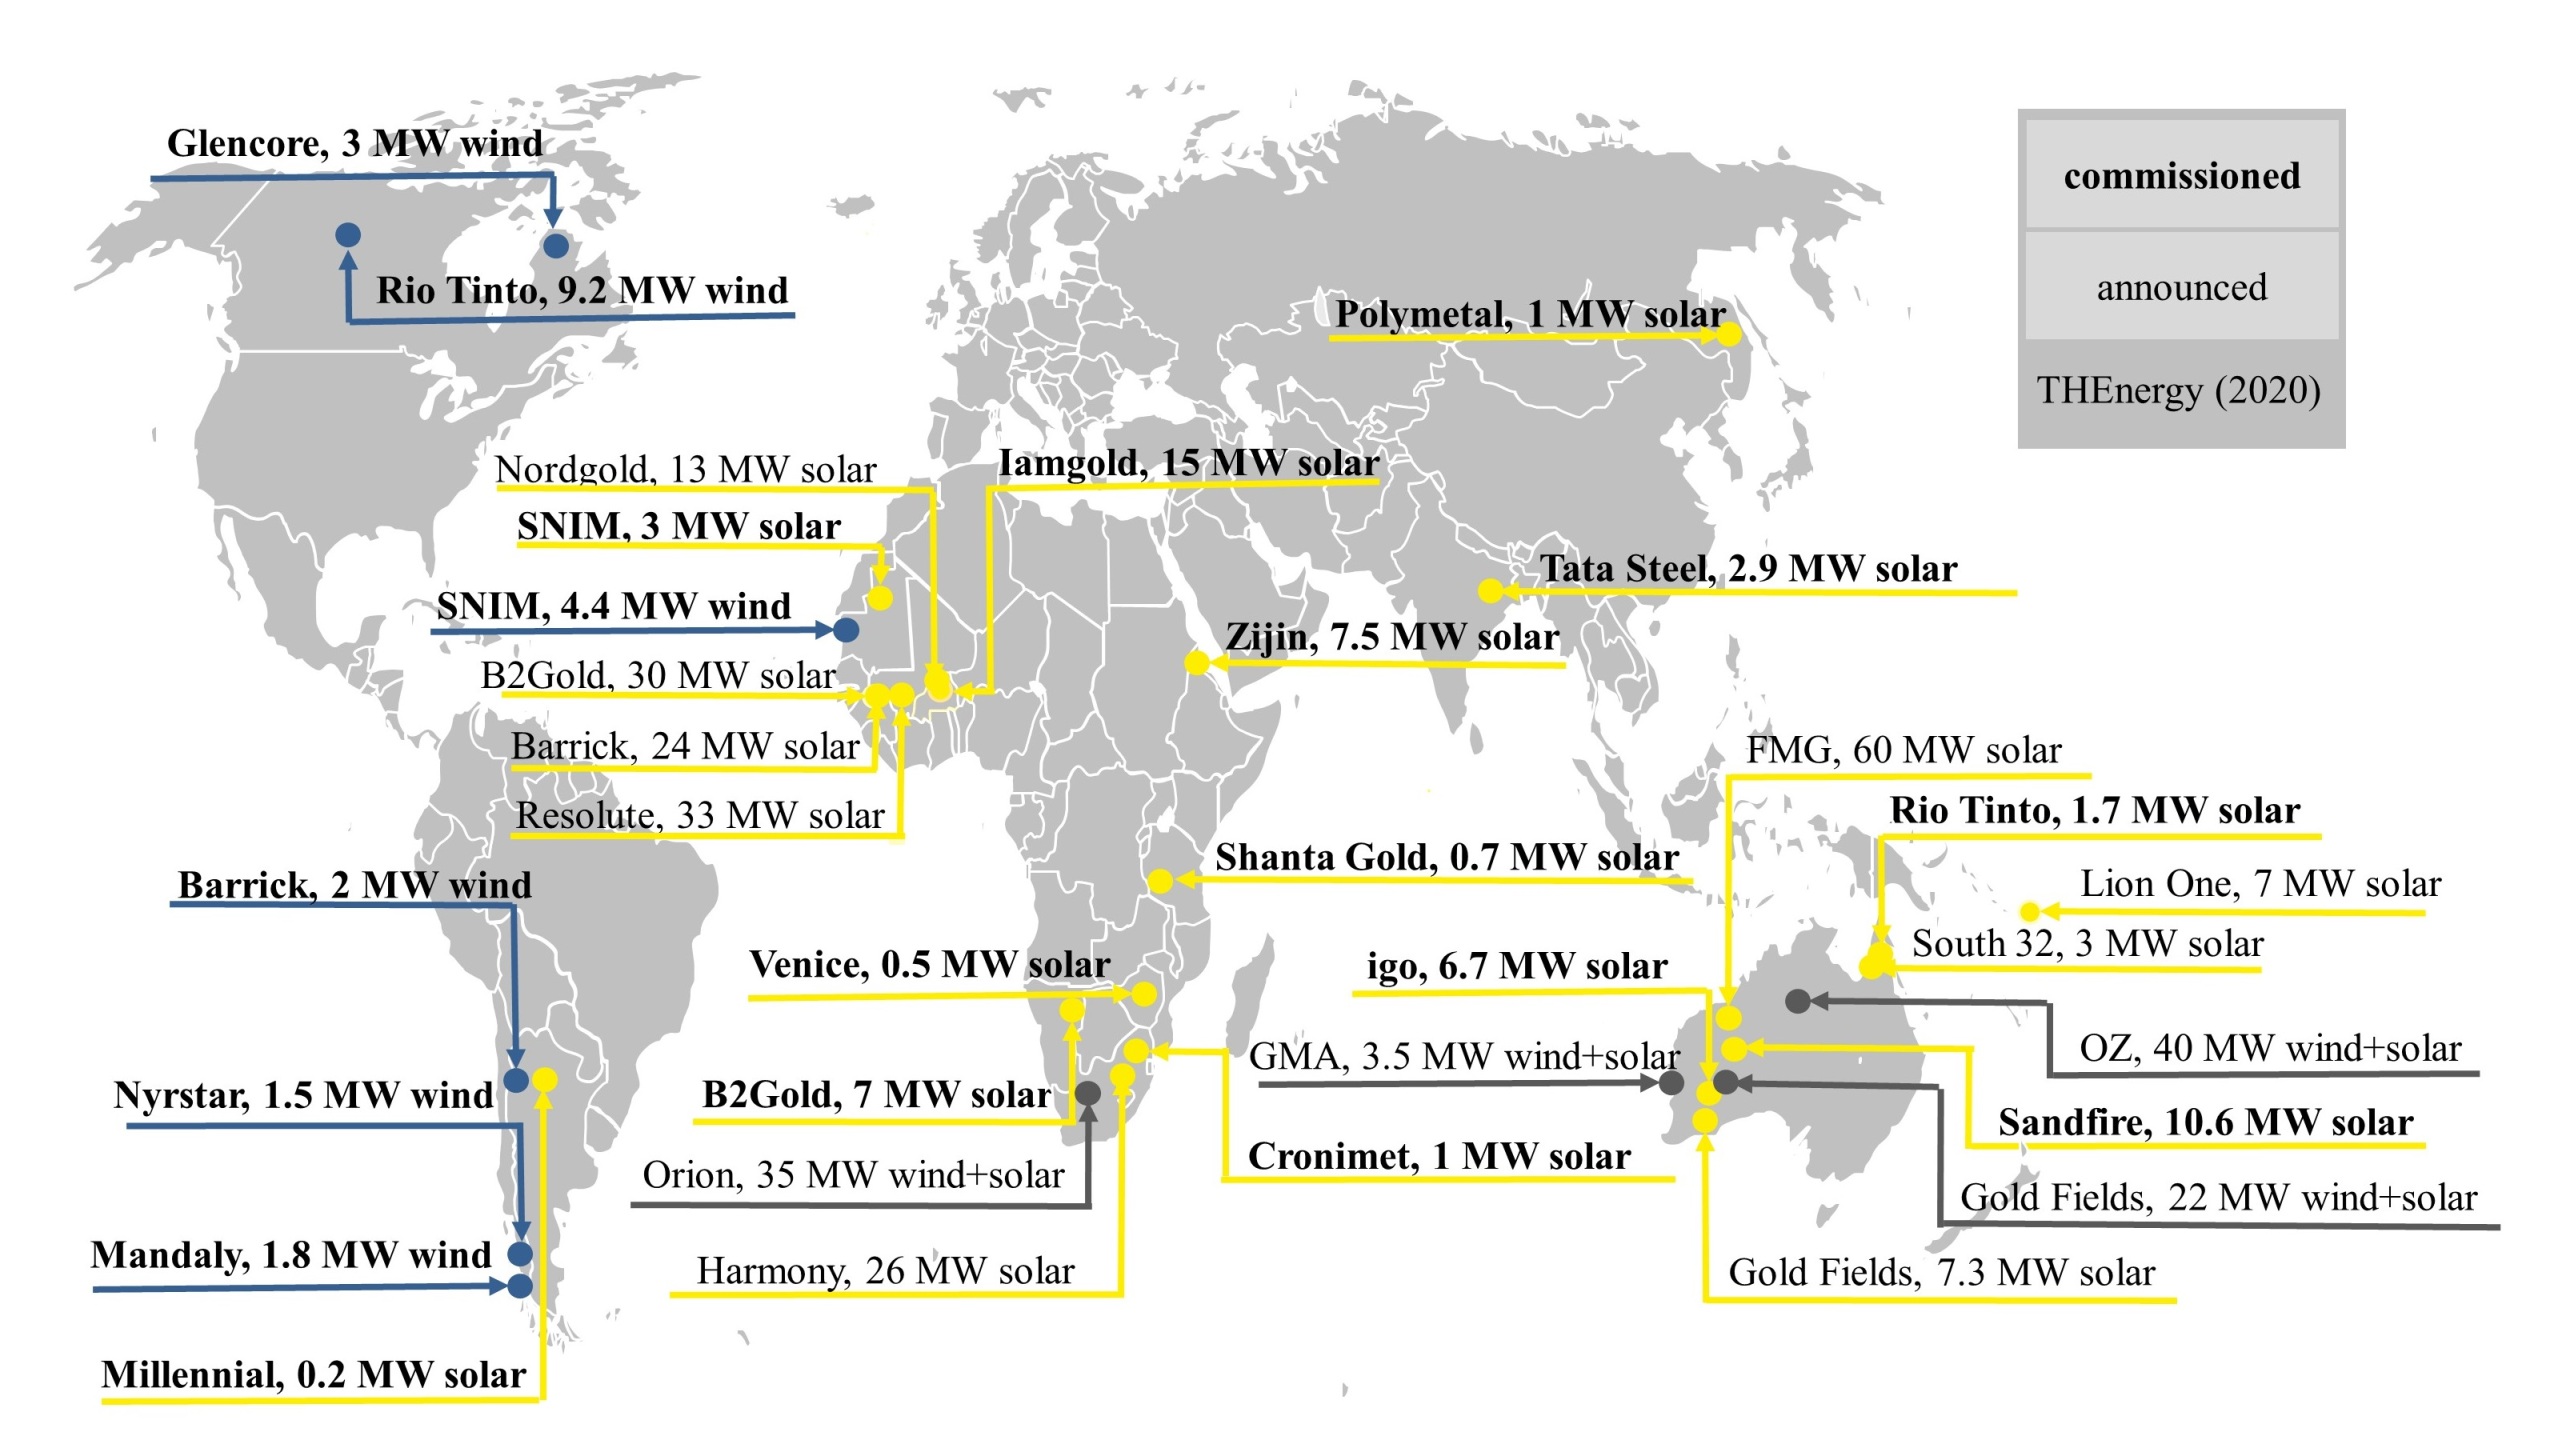 Redesigned and updated version of our world map "Major on-site solar and wind power projects in mining" - (c) THEnergy